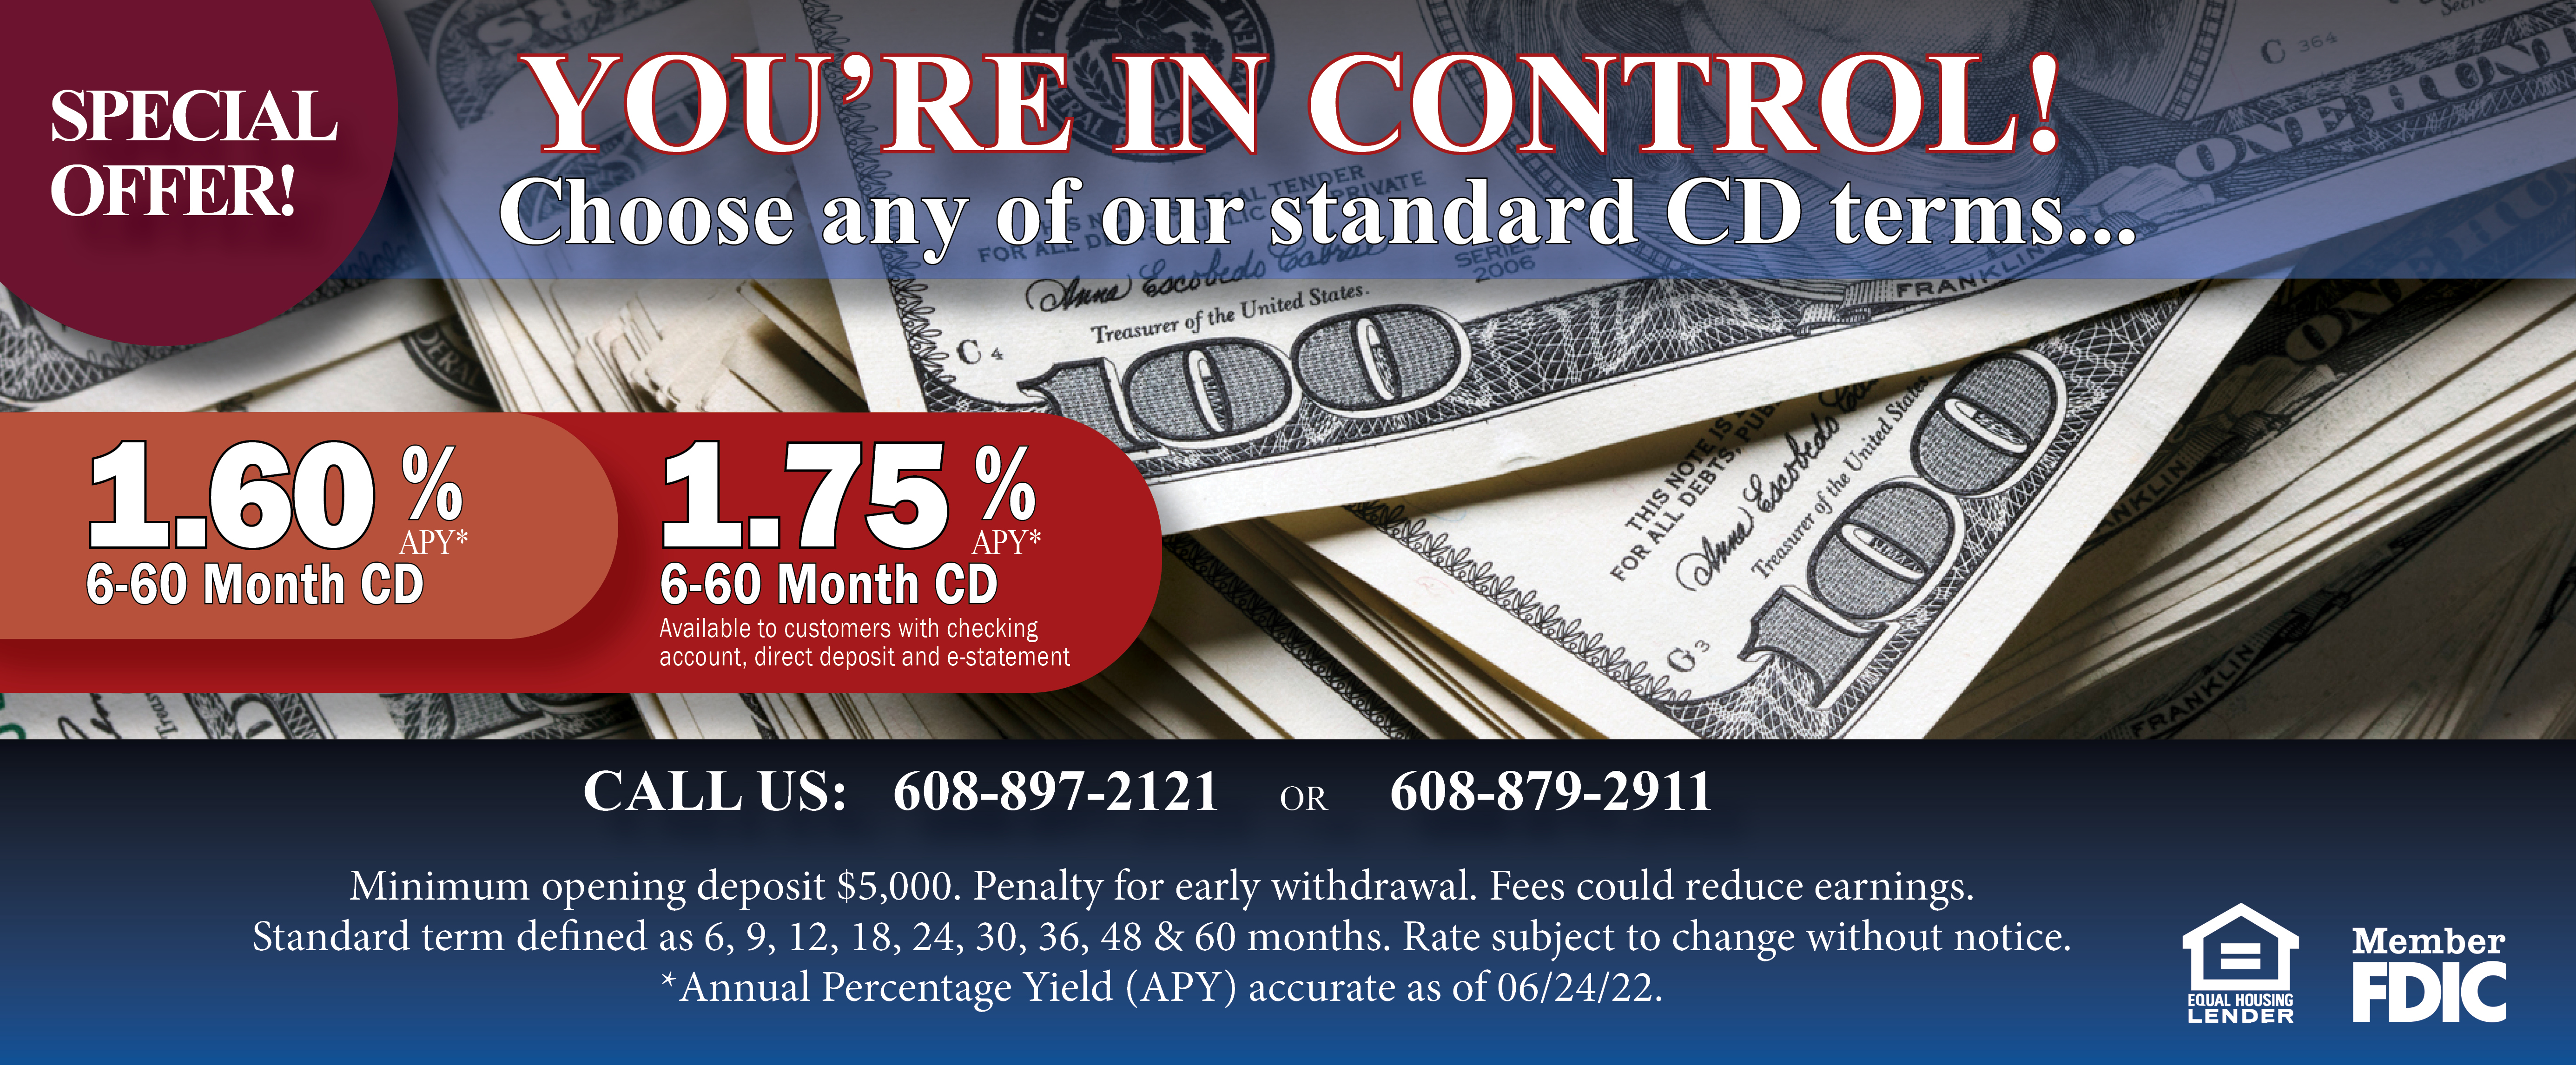 SPECIAL OFFER! You're in Control. Choose any of our standard CD terms... 1.60% APT 6-60 month CD 
 1.75% APY 6-60 month CD 
 Available to customers with checking account, direct deposit and e-statement. Minimum opening deposit $5,000. Penalty for early withdrawal. Fees could reduce earnings. 
Standard term defined as 6, 9, 12, 18, 24, 30, 36, 48 & 60 months. Rate subject to change without notice.   
*Annual Percentage Yield (APY) accurate as of 06/24/22. Member FDIC